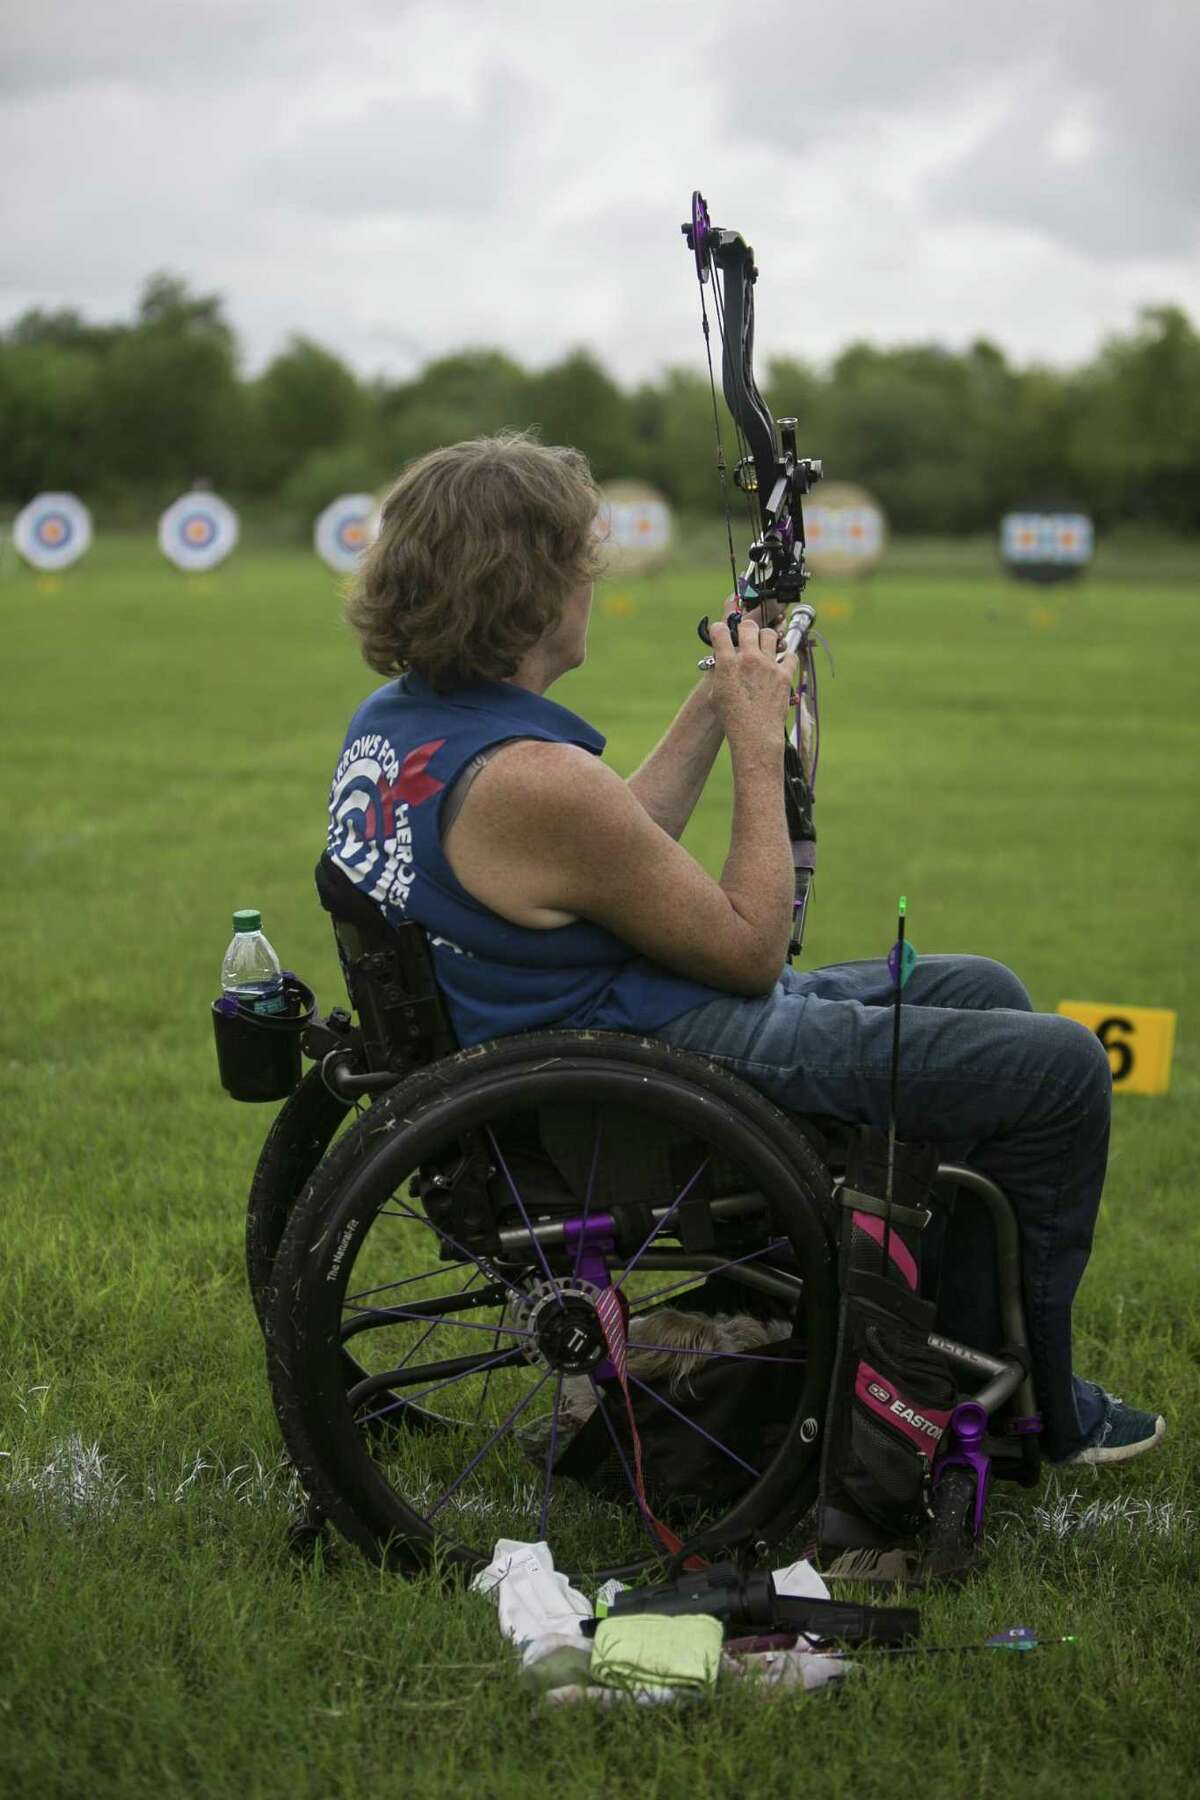 Laura Jeanne of Decatur raises her bow to shoot during the archery competition of the Valor Games Southwest held at Mission Concepcion Sports Park in San Antonio Wednesday, Sept. 26, 2018. Veterans and service members with physical disabilities gathered together to compete and celebrate sports as a means of empowering people and strengthening the community.